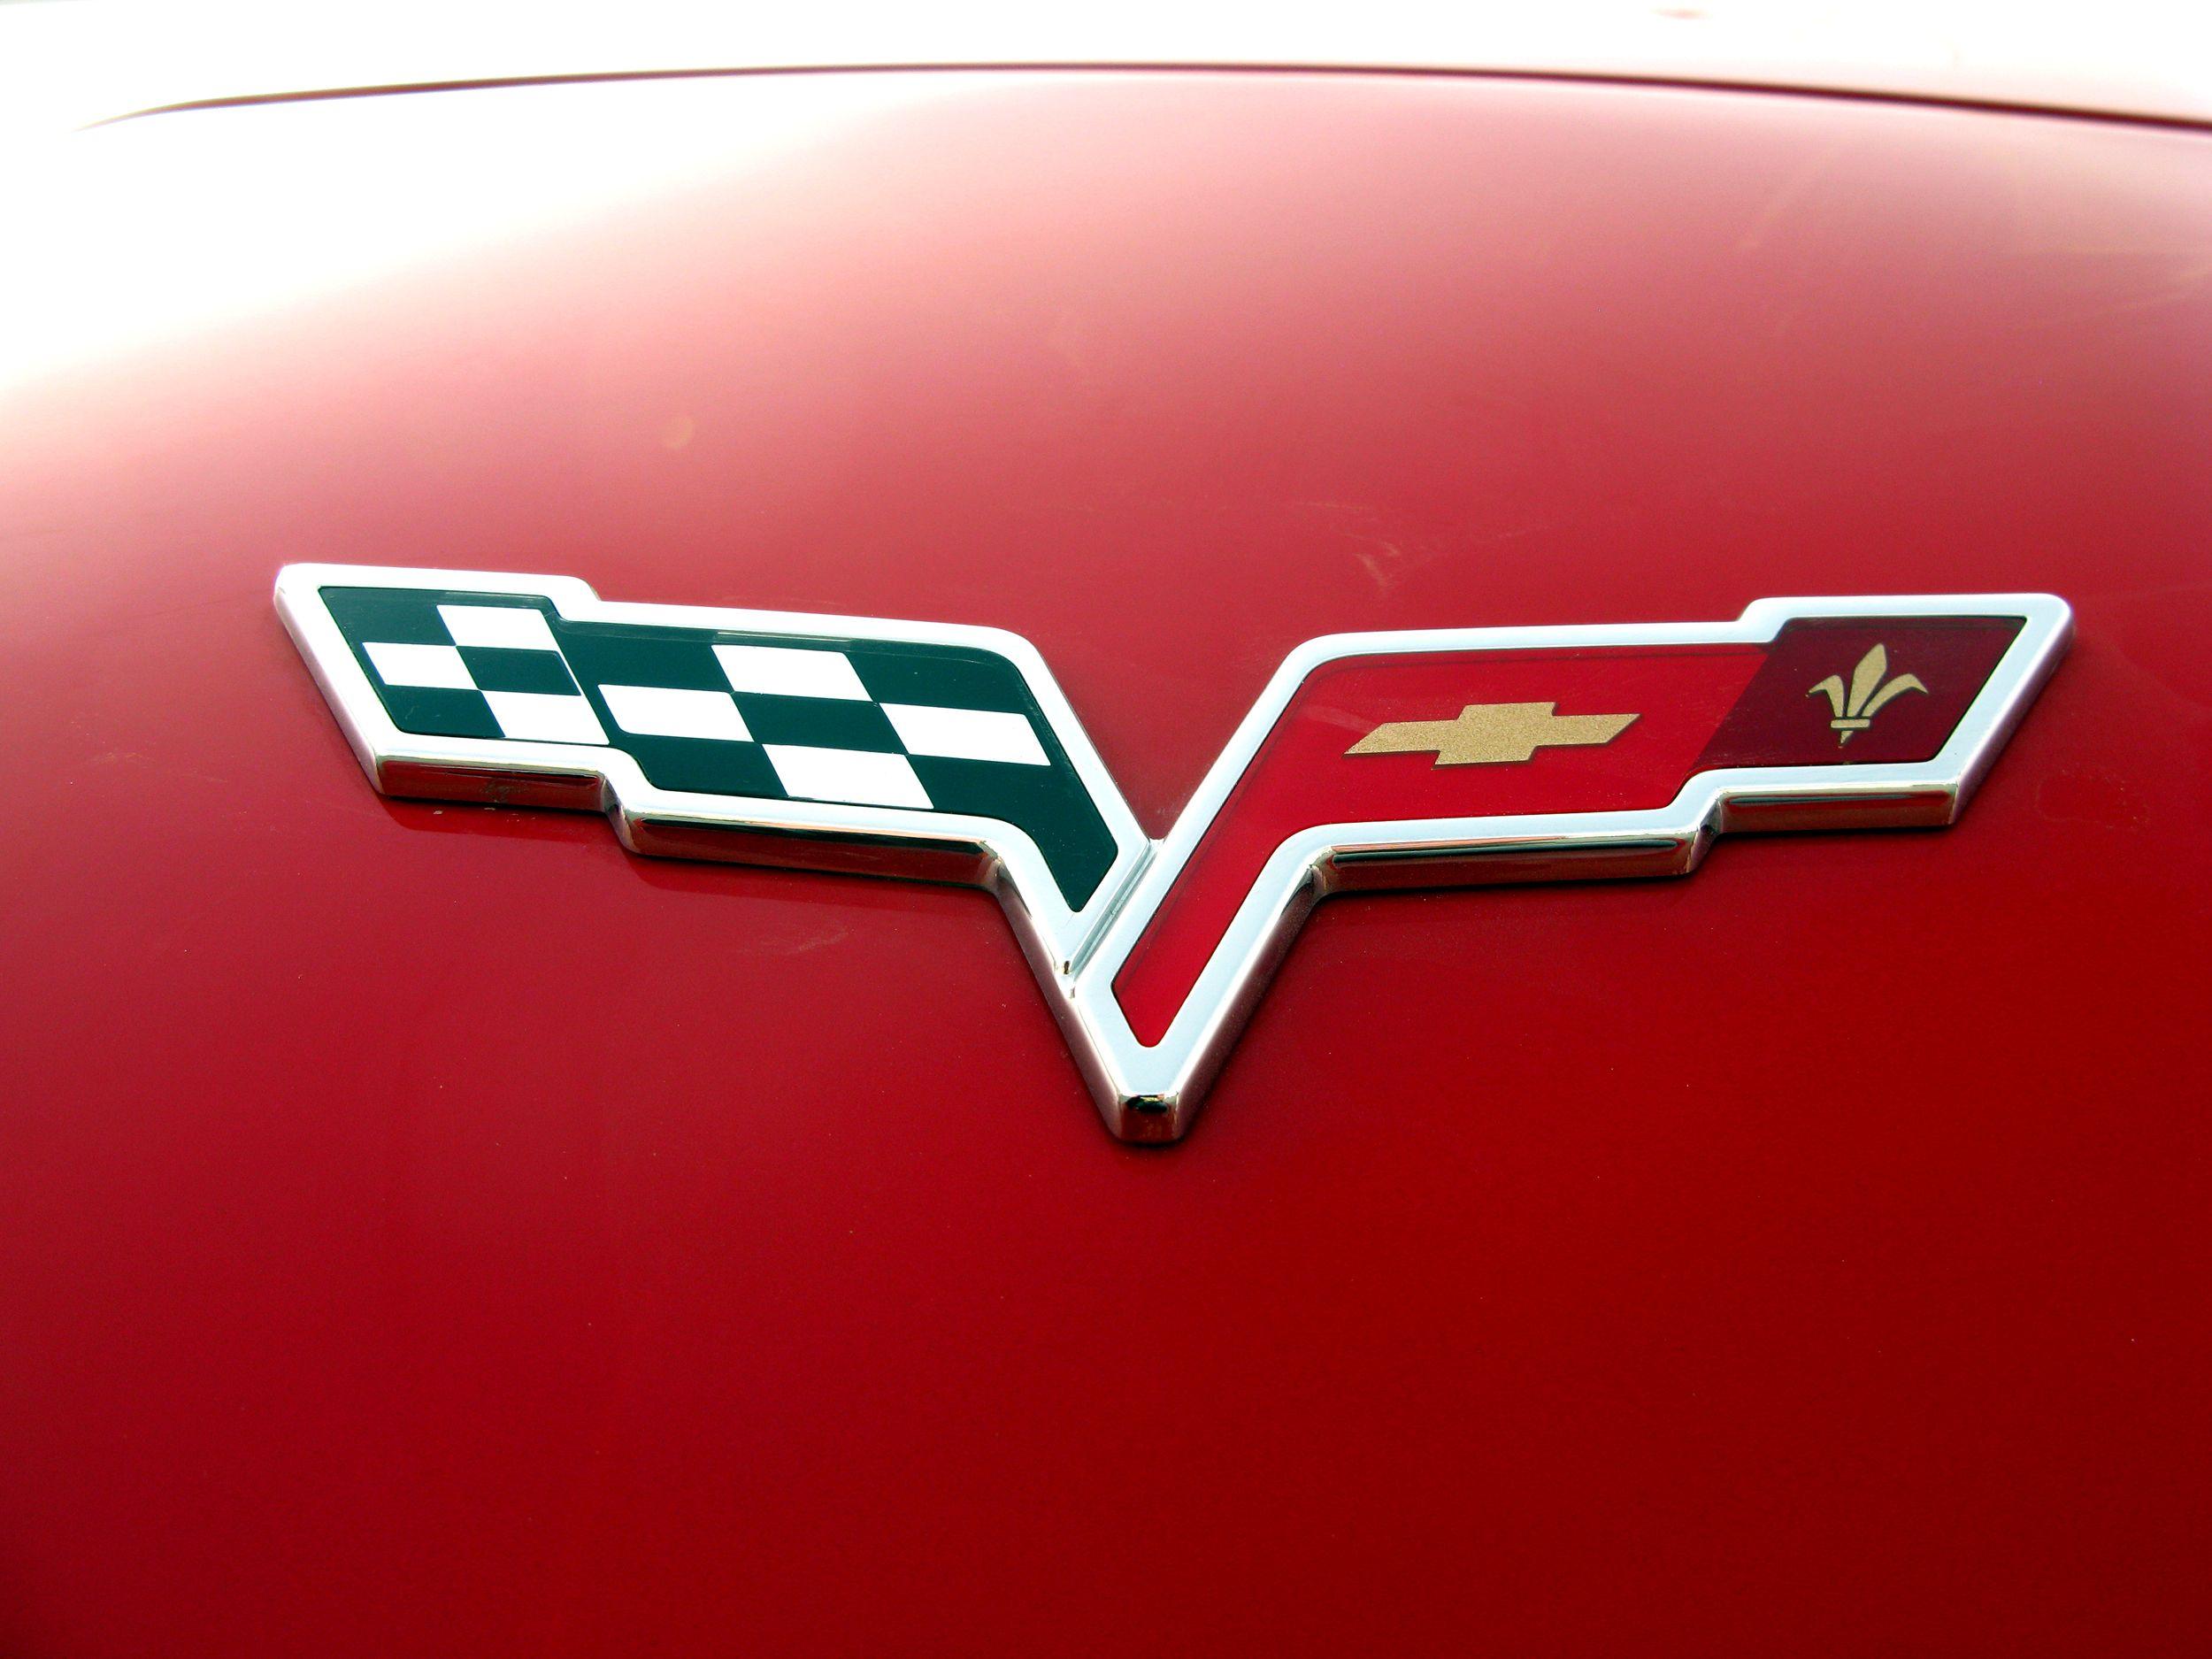 Red and White Car Logo - Chevy Logo, Chevrolet Car Symbol Meaning and History. Car Brand